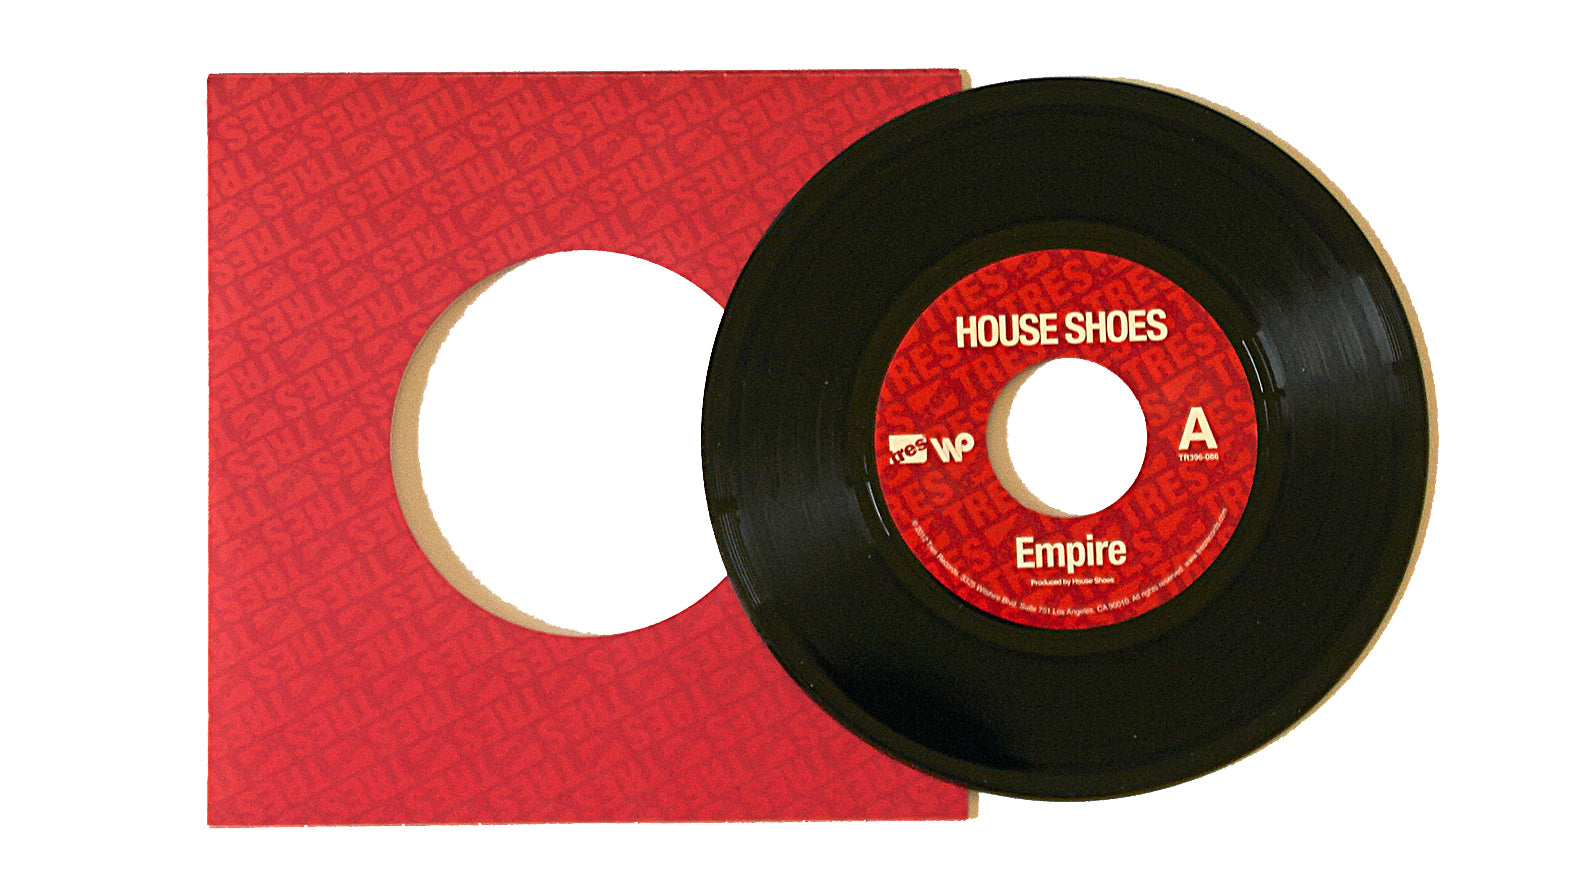 House Shoes "Empire" (7")